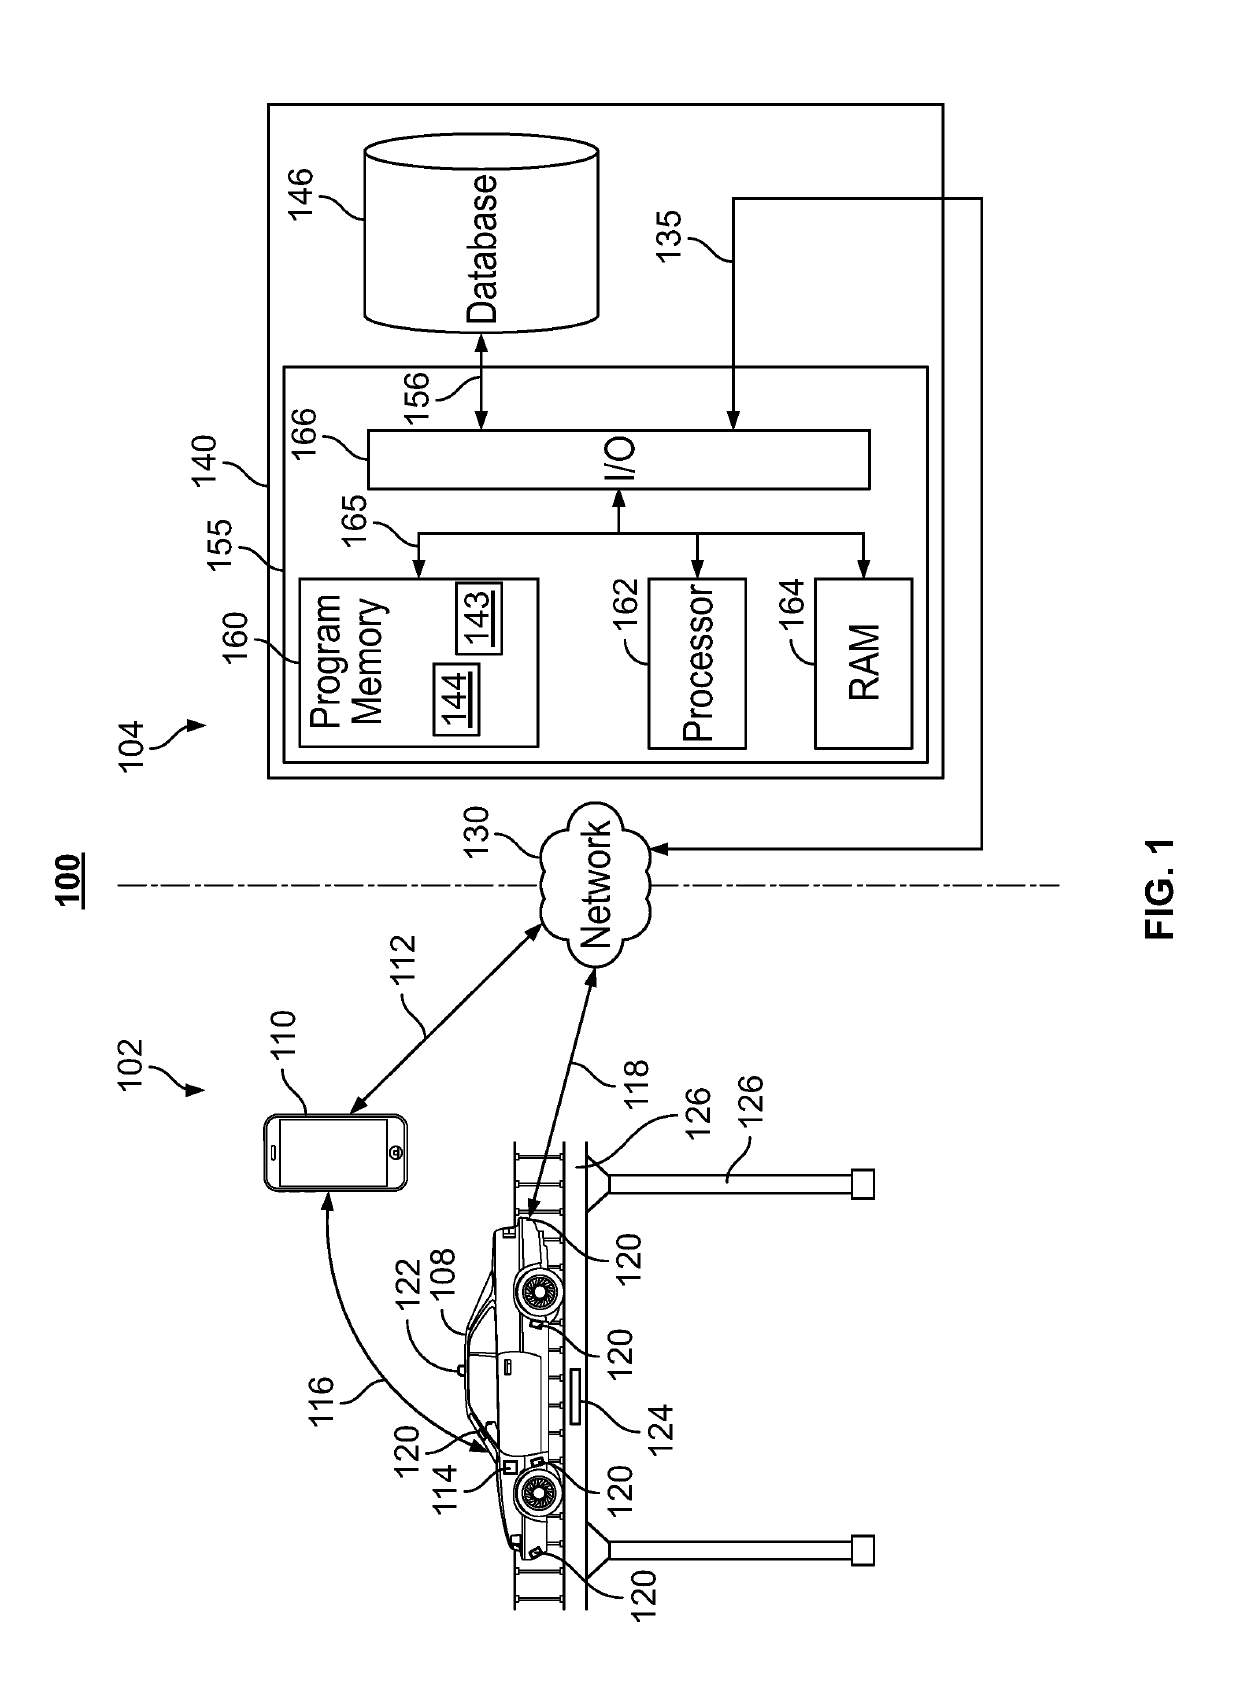 Traffic risk avoidance for a route selection system